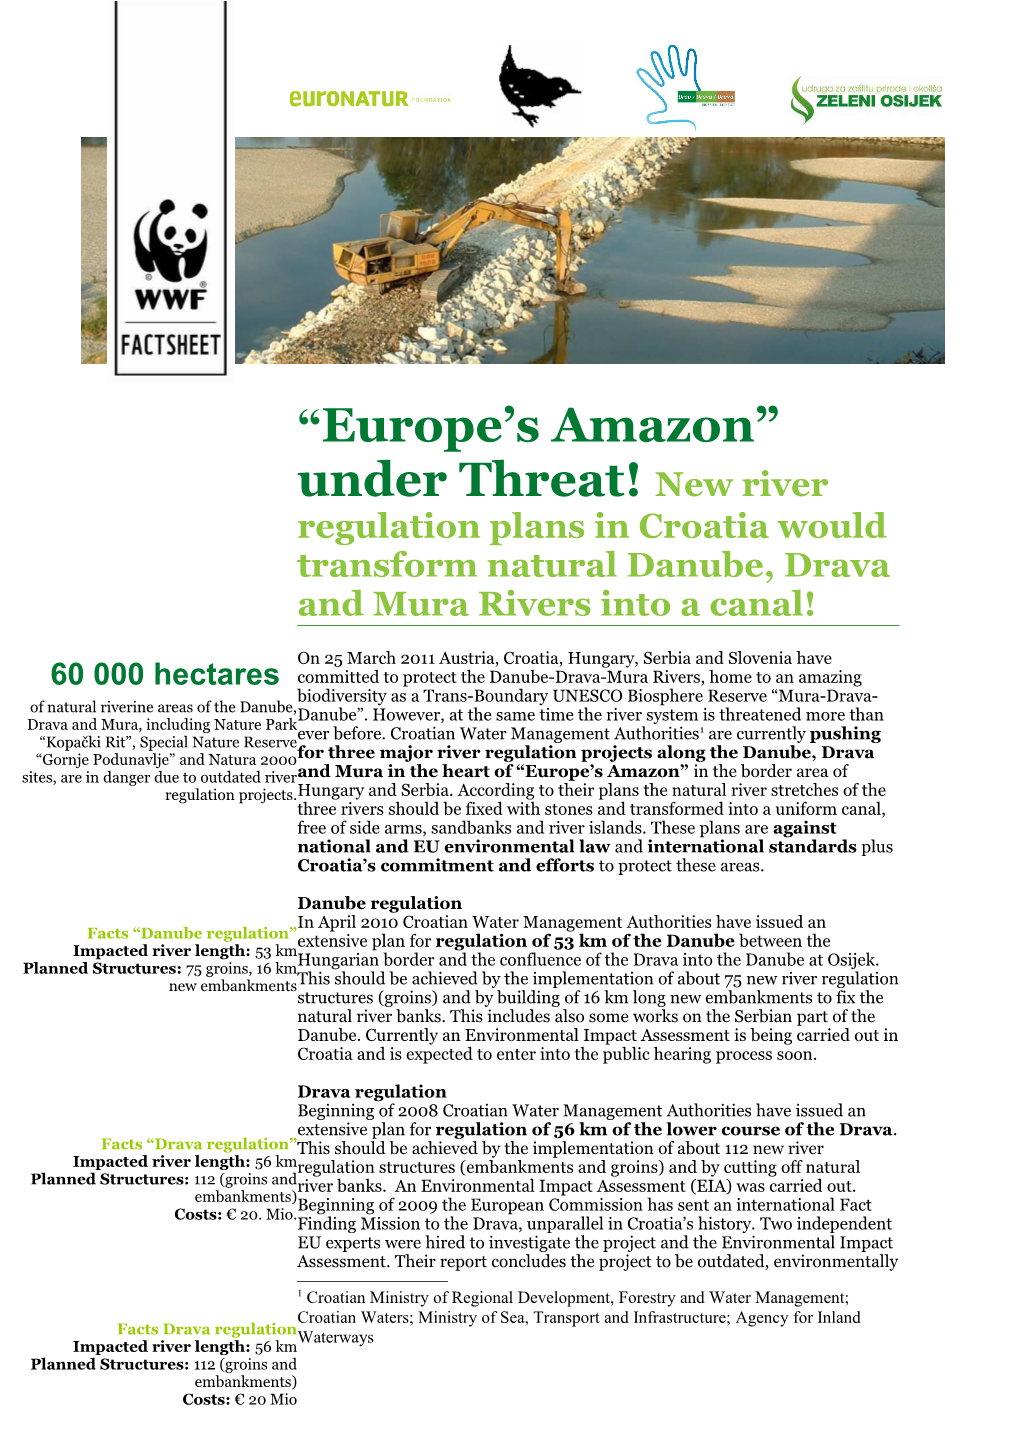 Europe S Amazon Under Threat! New River Regulation Plans in Croatia Would Transform Natural